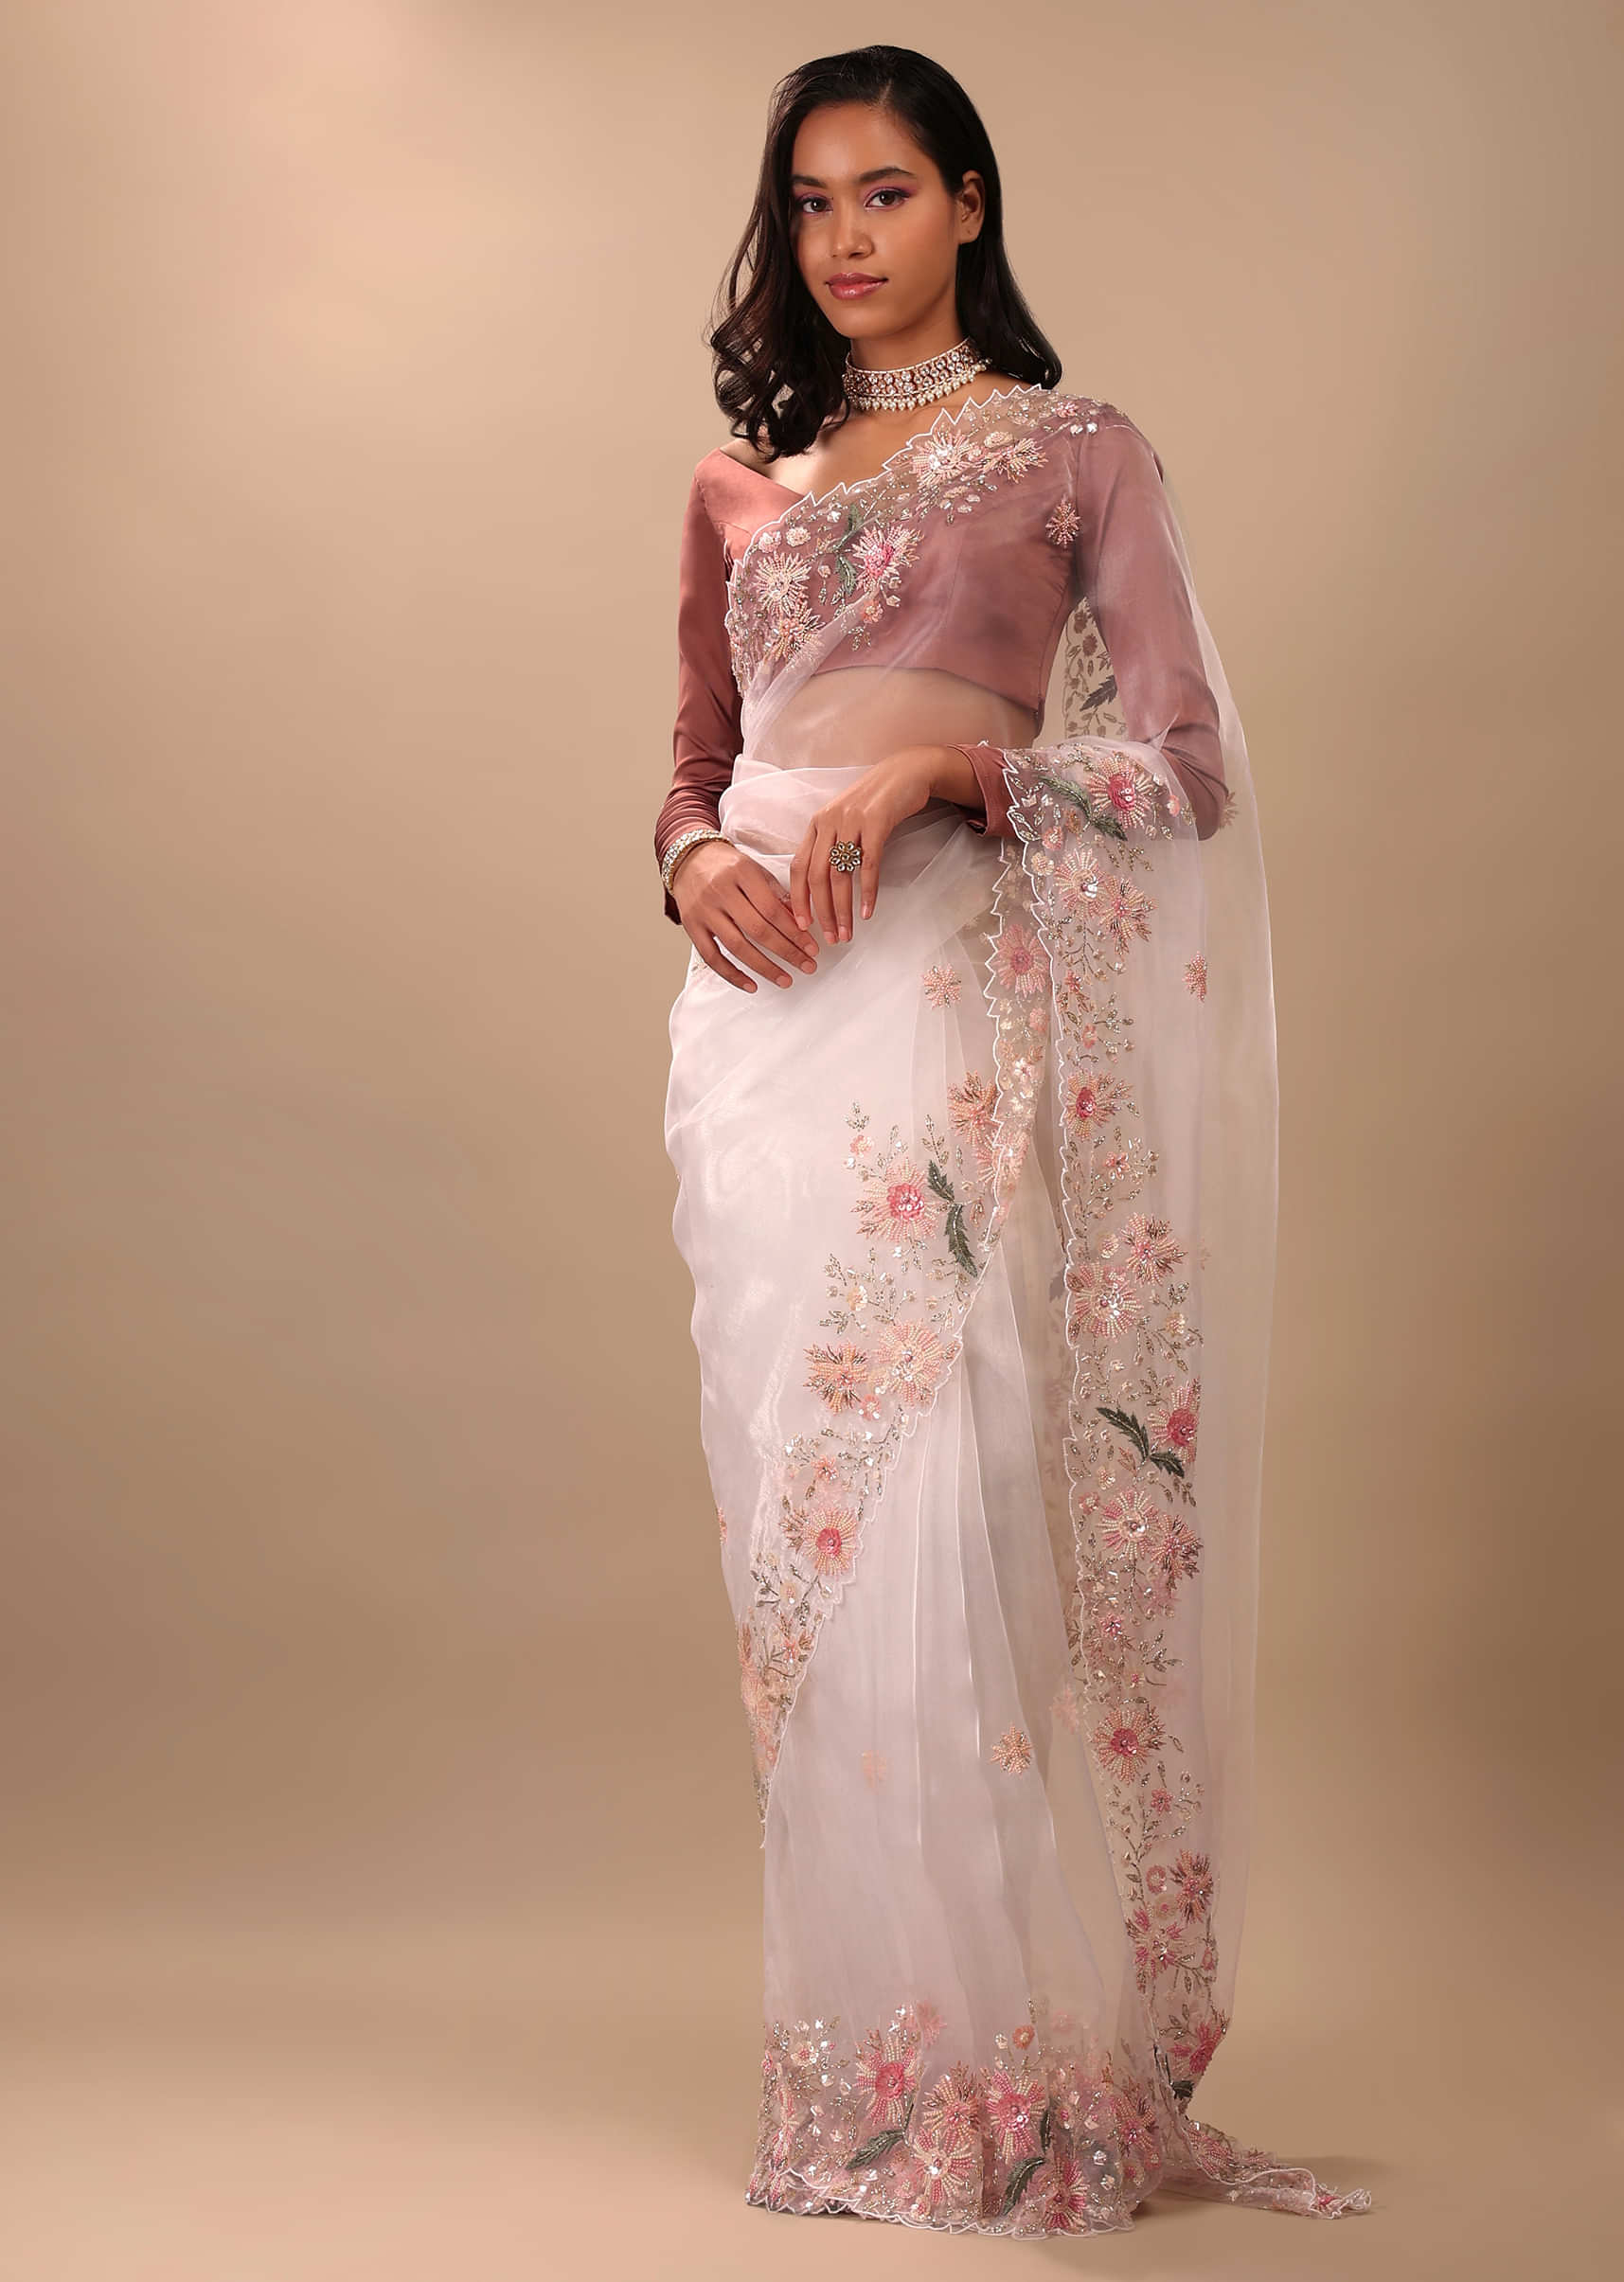 Daisy Dancer White Saree In Organza With 3D Floral Embroidery